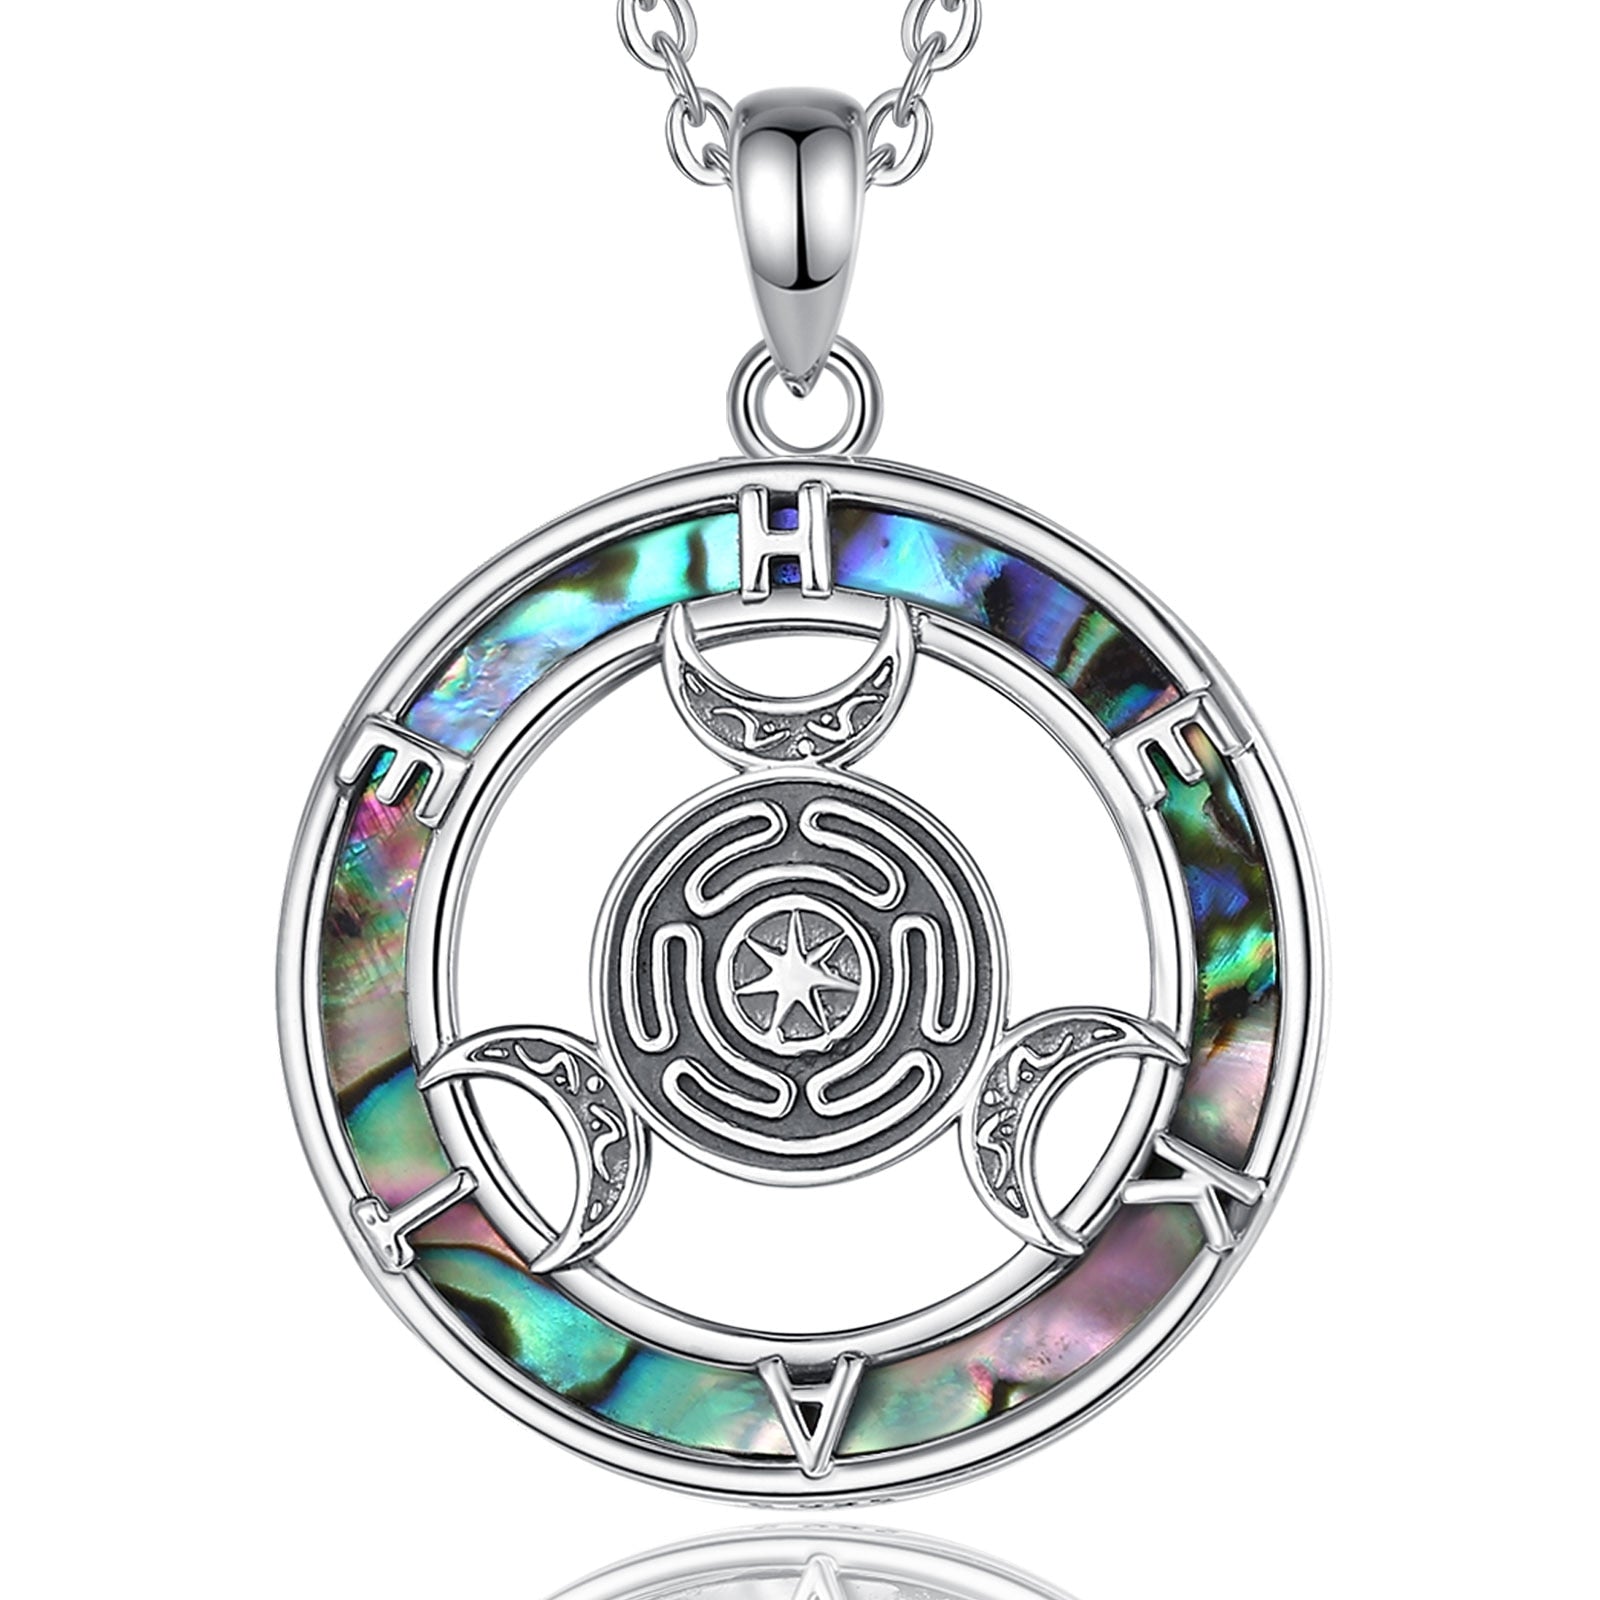 Hecate Wheel Necklace Moon Goddess Wicca Amulet Jewelry-MoonChildWorld